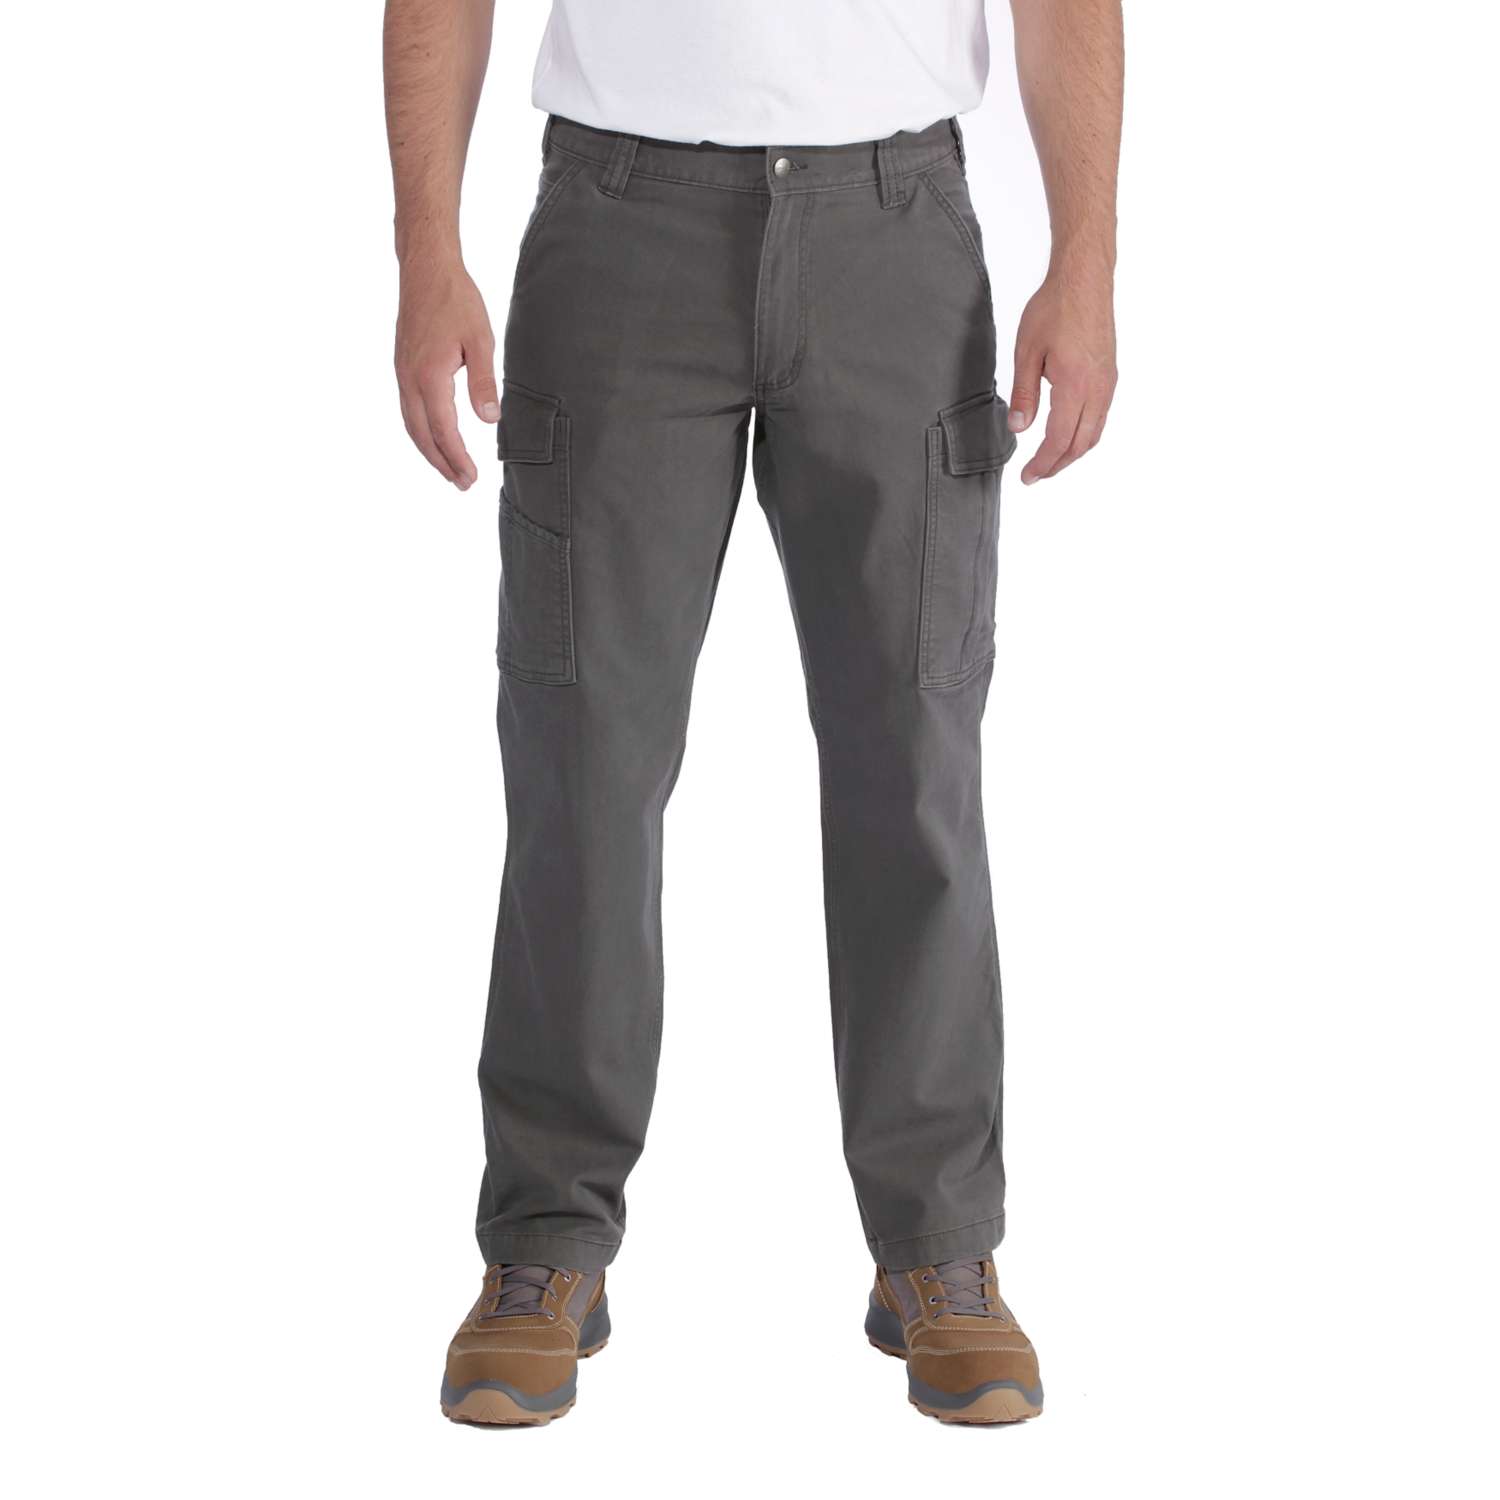 RUGGED_FLEX_RIGBY_CARGO_PANT_voW9ivCSYs